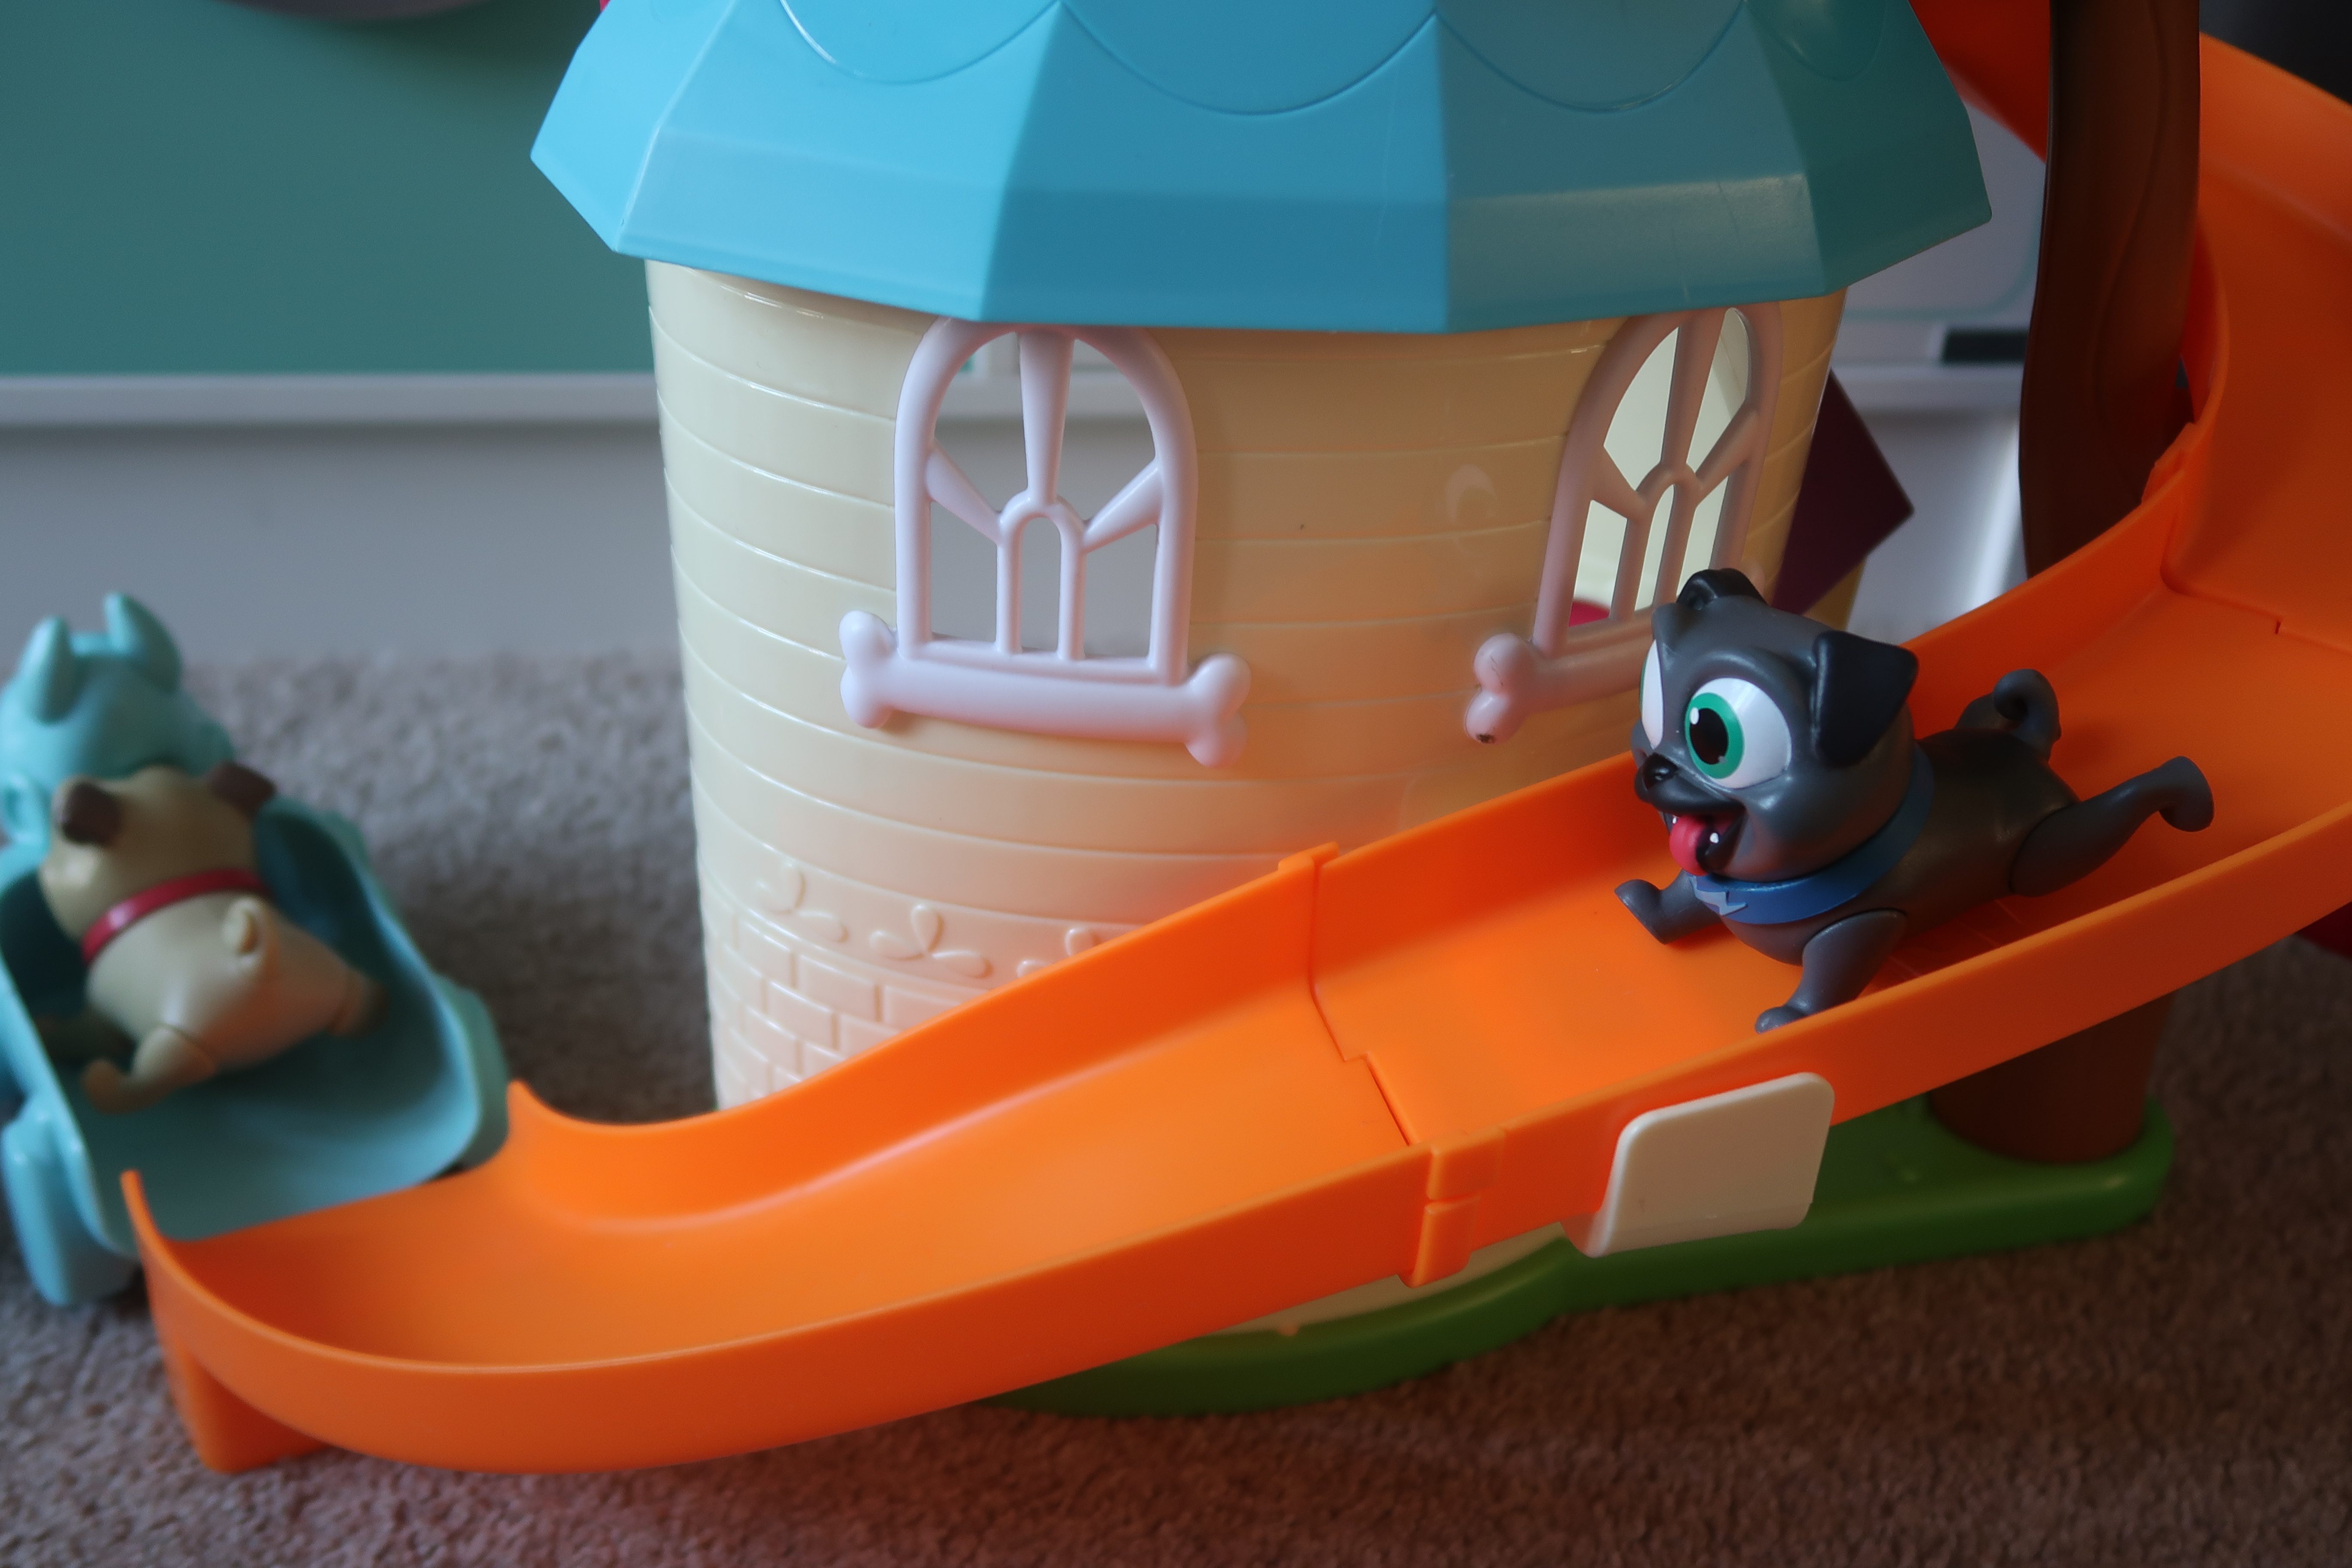 REVIEW – Puppy Dog Pals Doghouse Playset